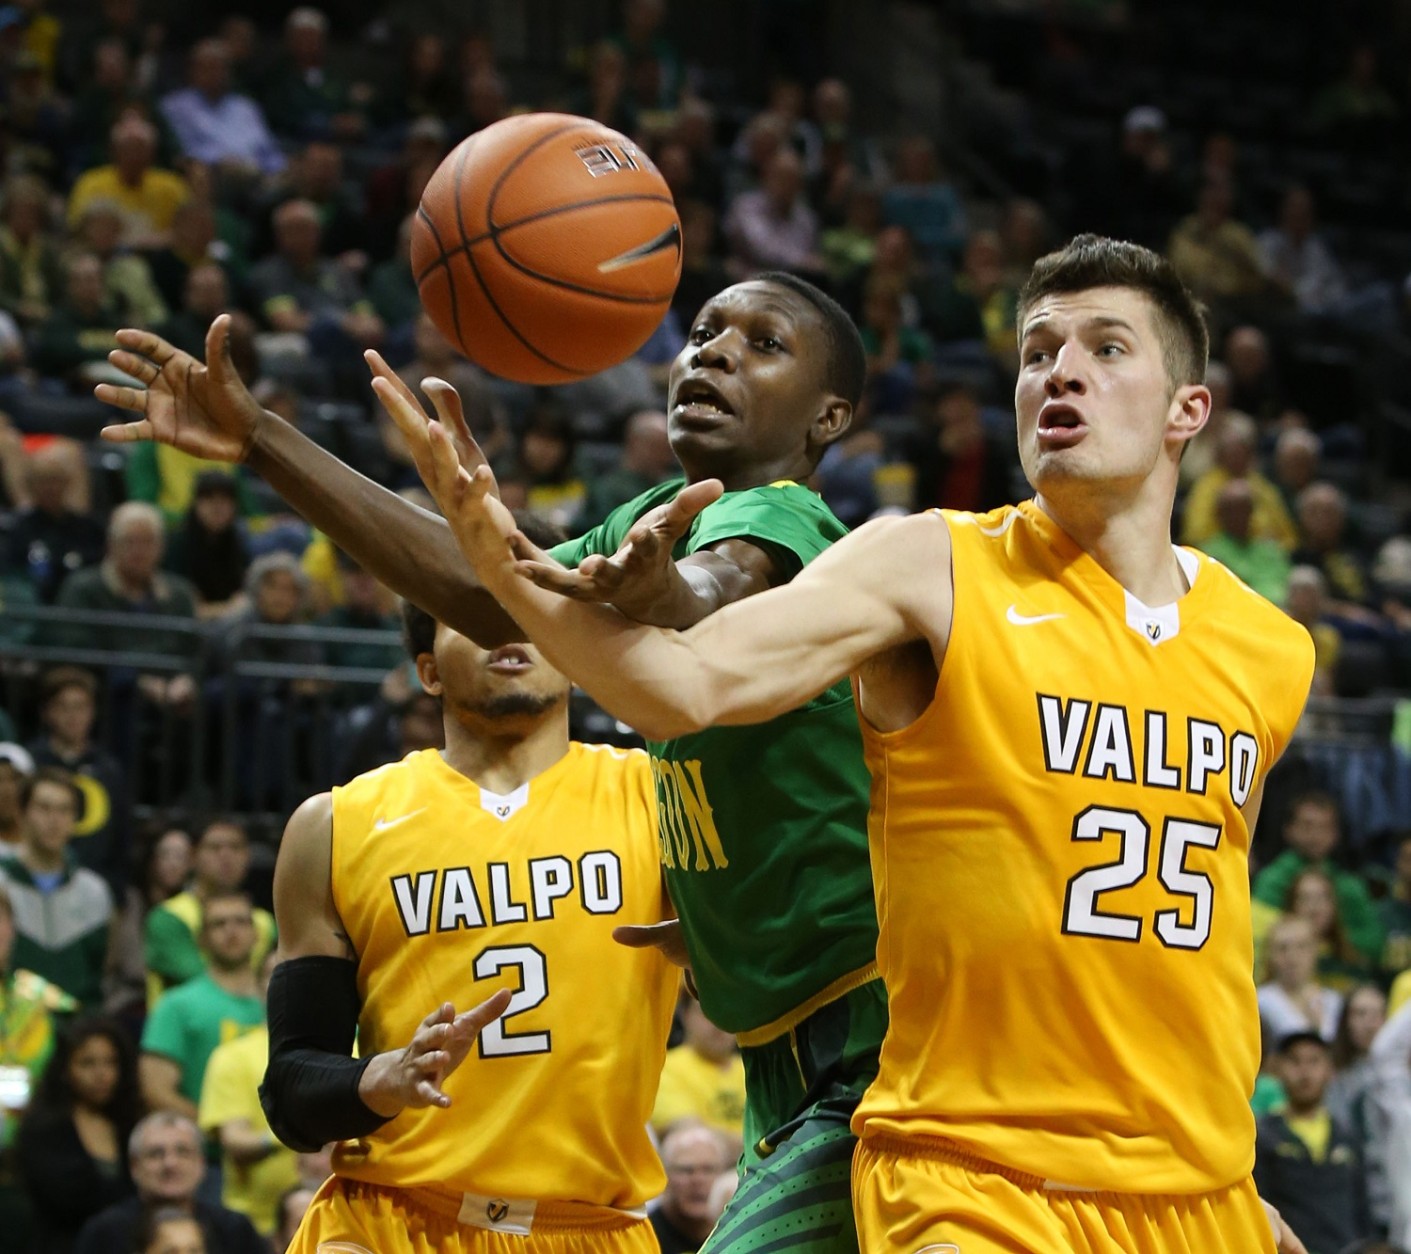 Valparaiso's Tevonn Walker, left, and Alec Peters, right, battle Oregon's Chris Boucher for a rebound during the second half of an NCAA college basketball game Sunday, Nov. 22, 2015, in Eugene, Ore. (AP Photo/Chris Pietsch)